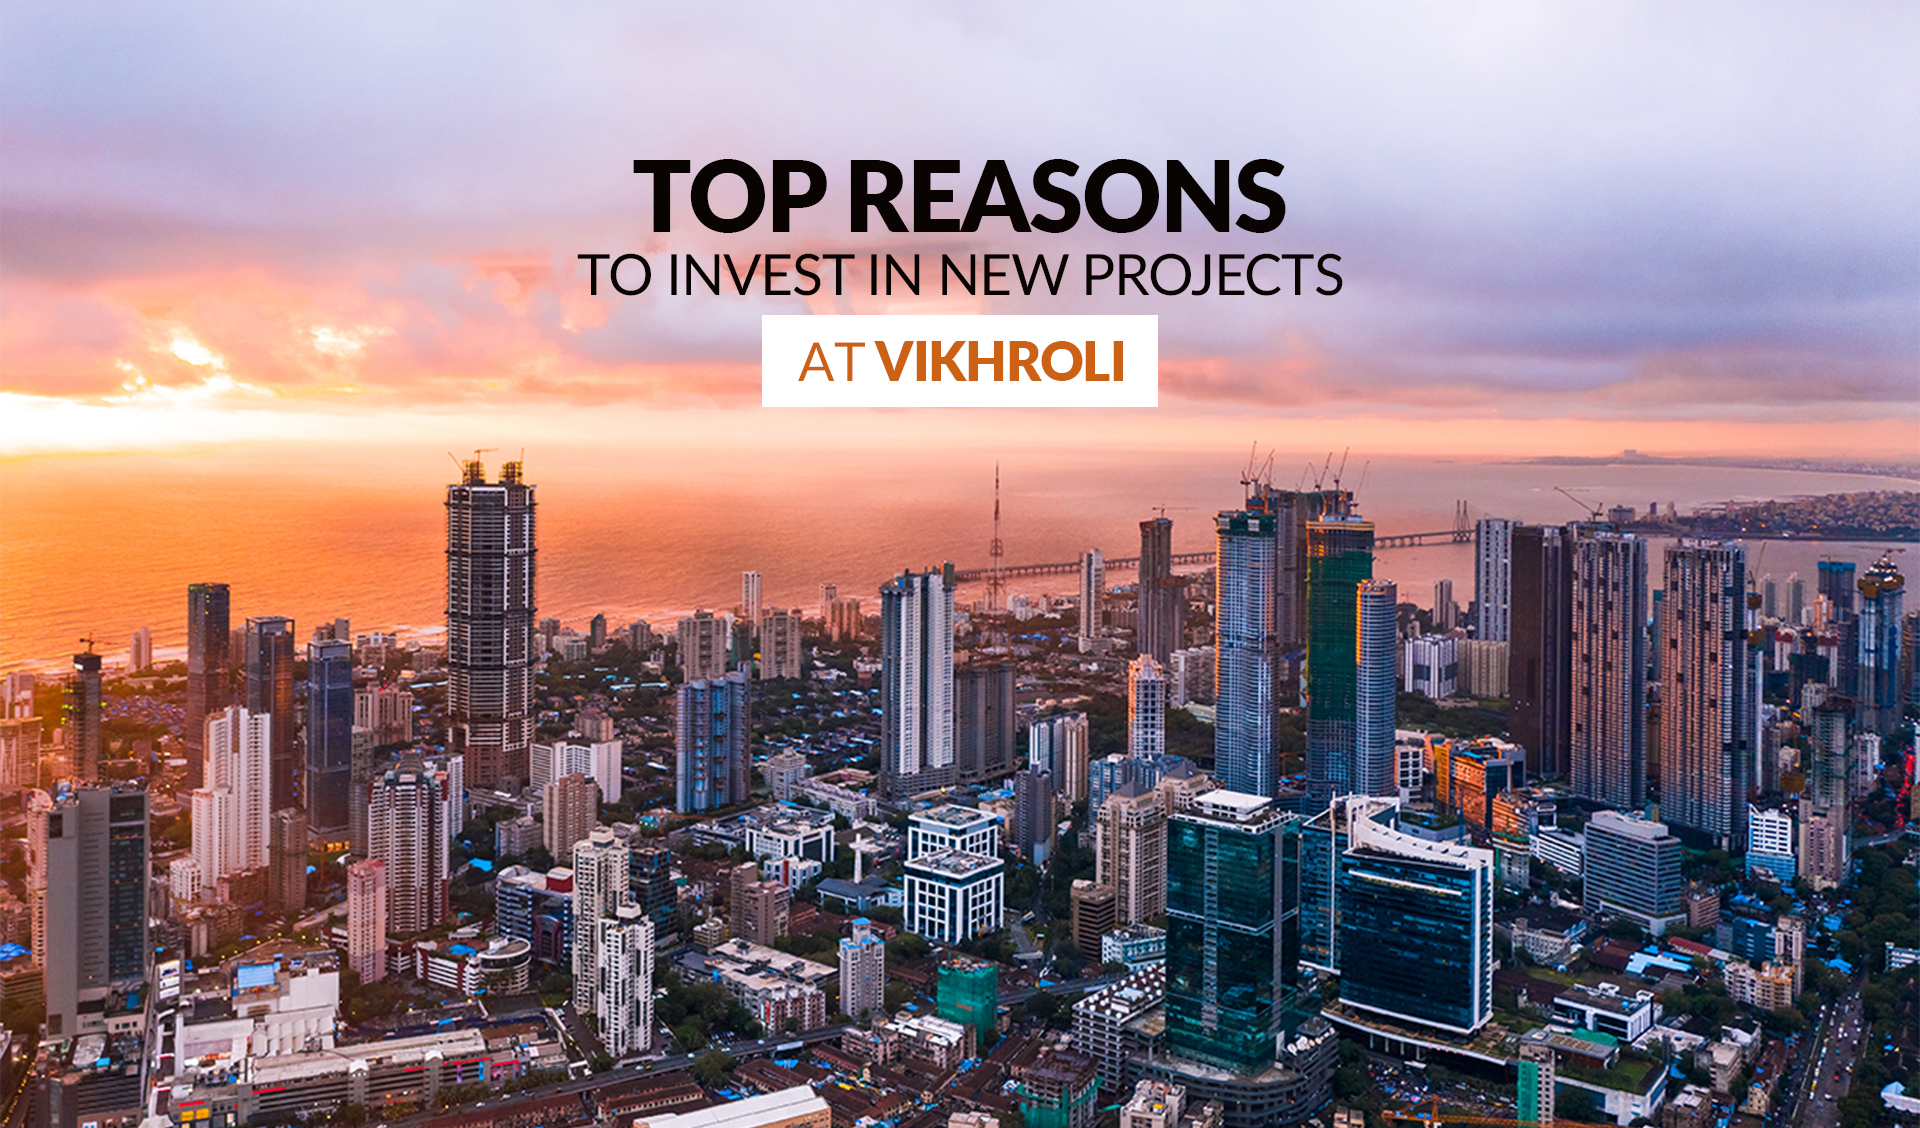 Top reasons to invest in new projects at Vikhroli